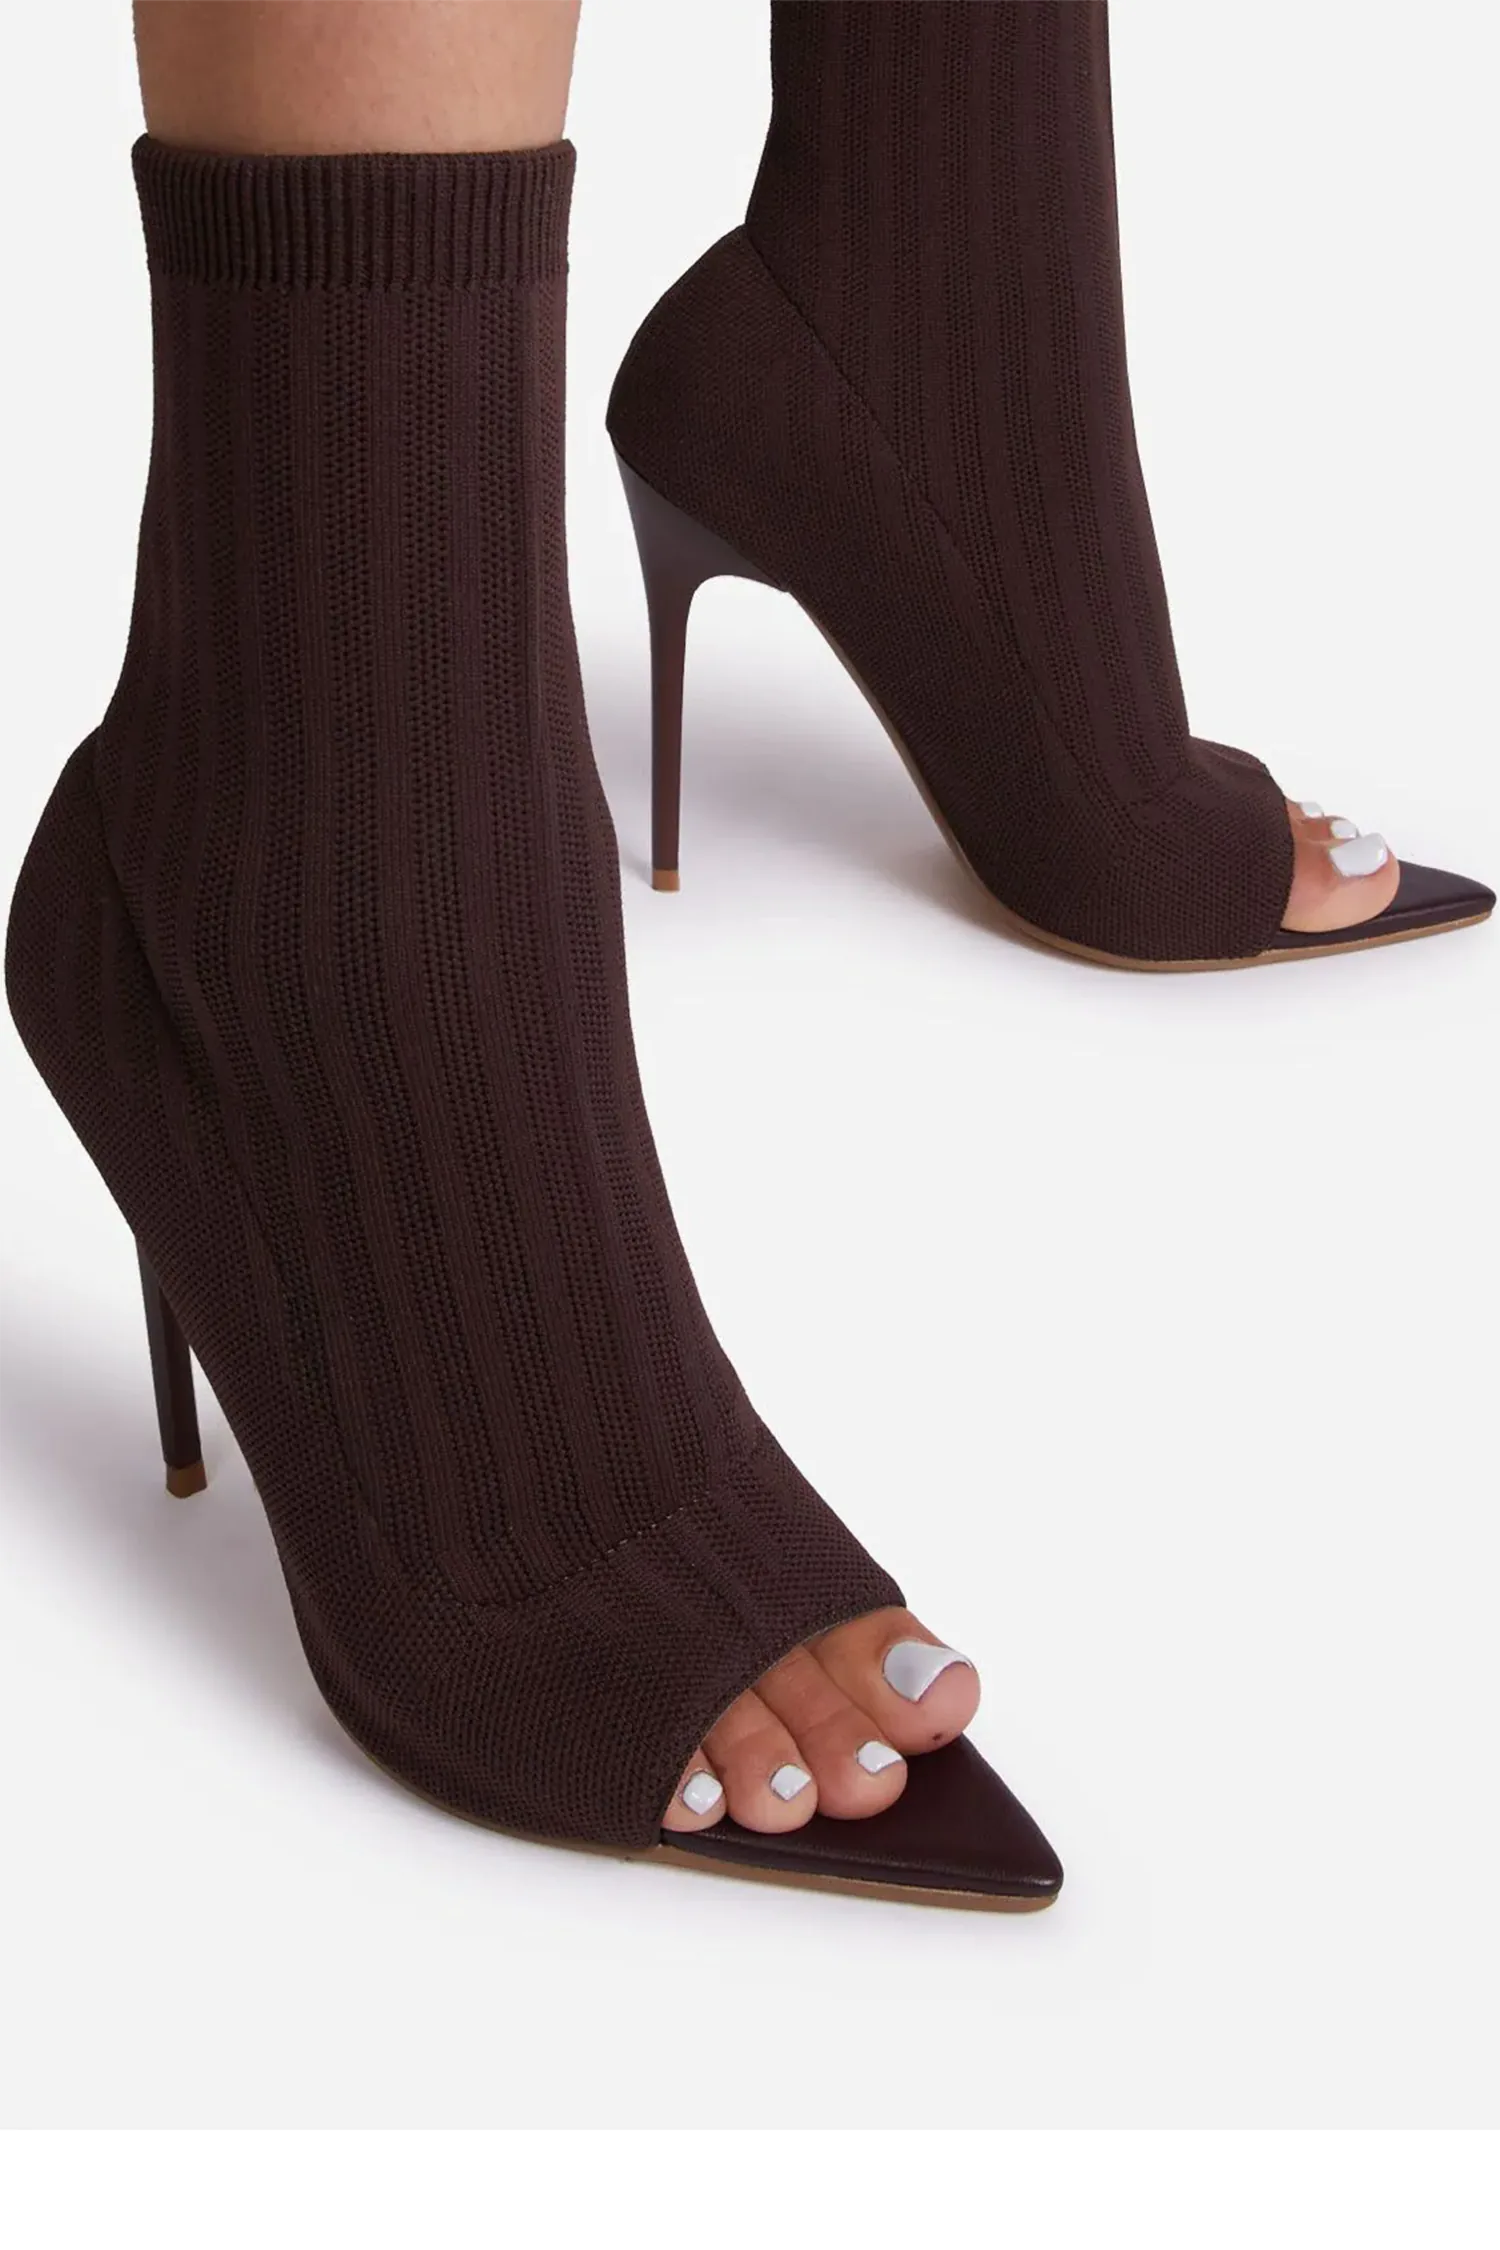 Brown Pointed Peep Toe Stiletto Heels Ankle Sock Boots